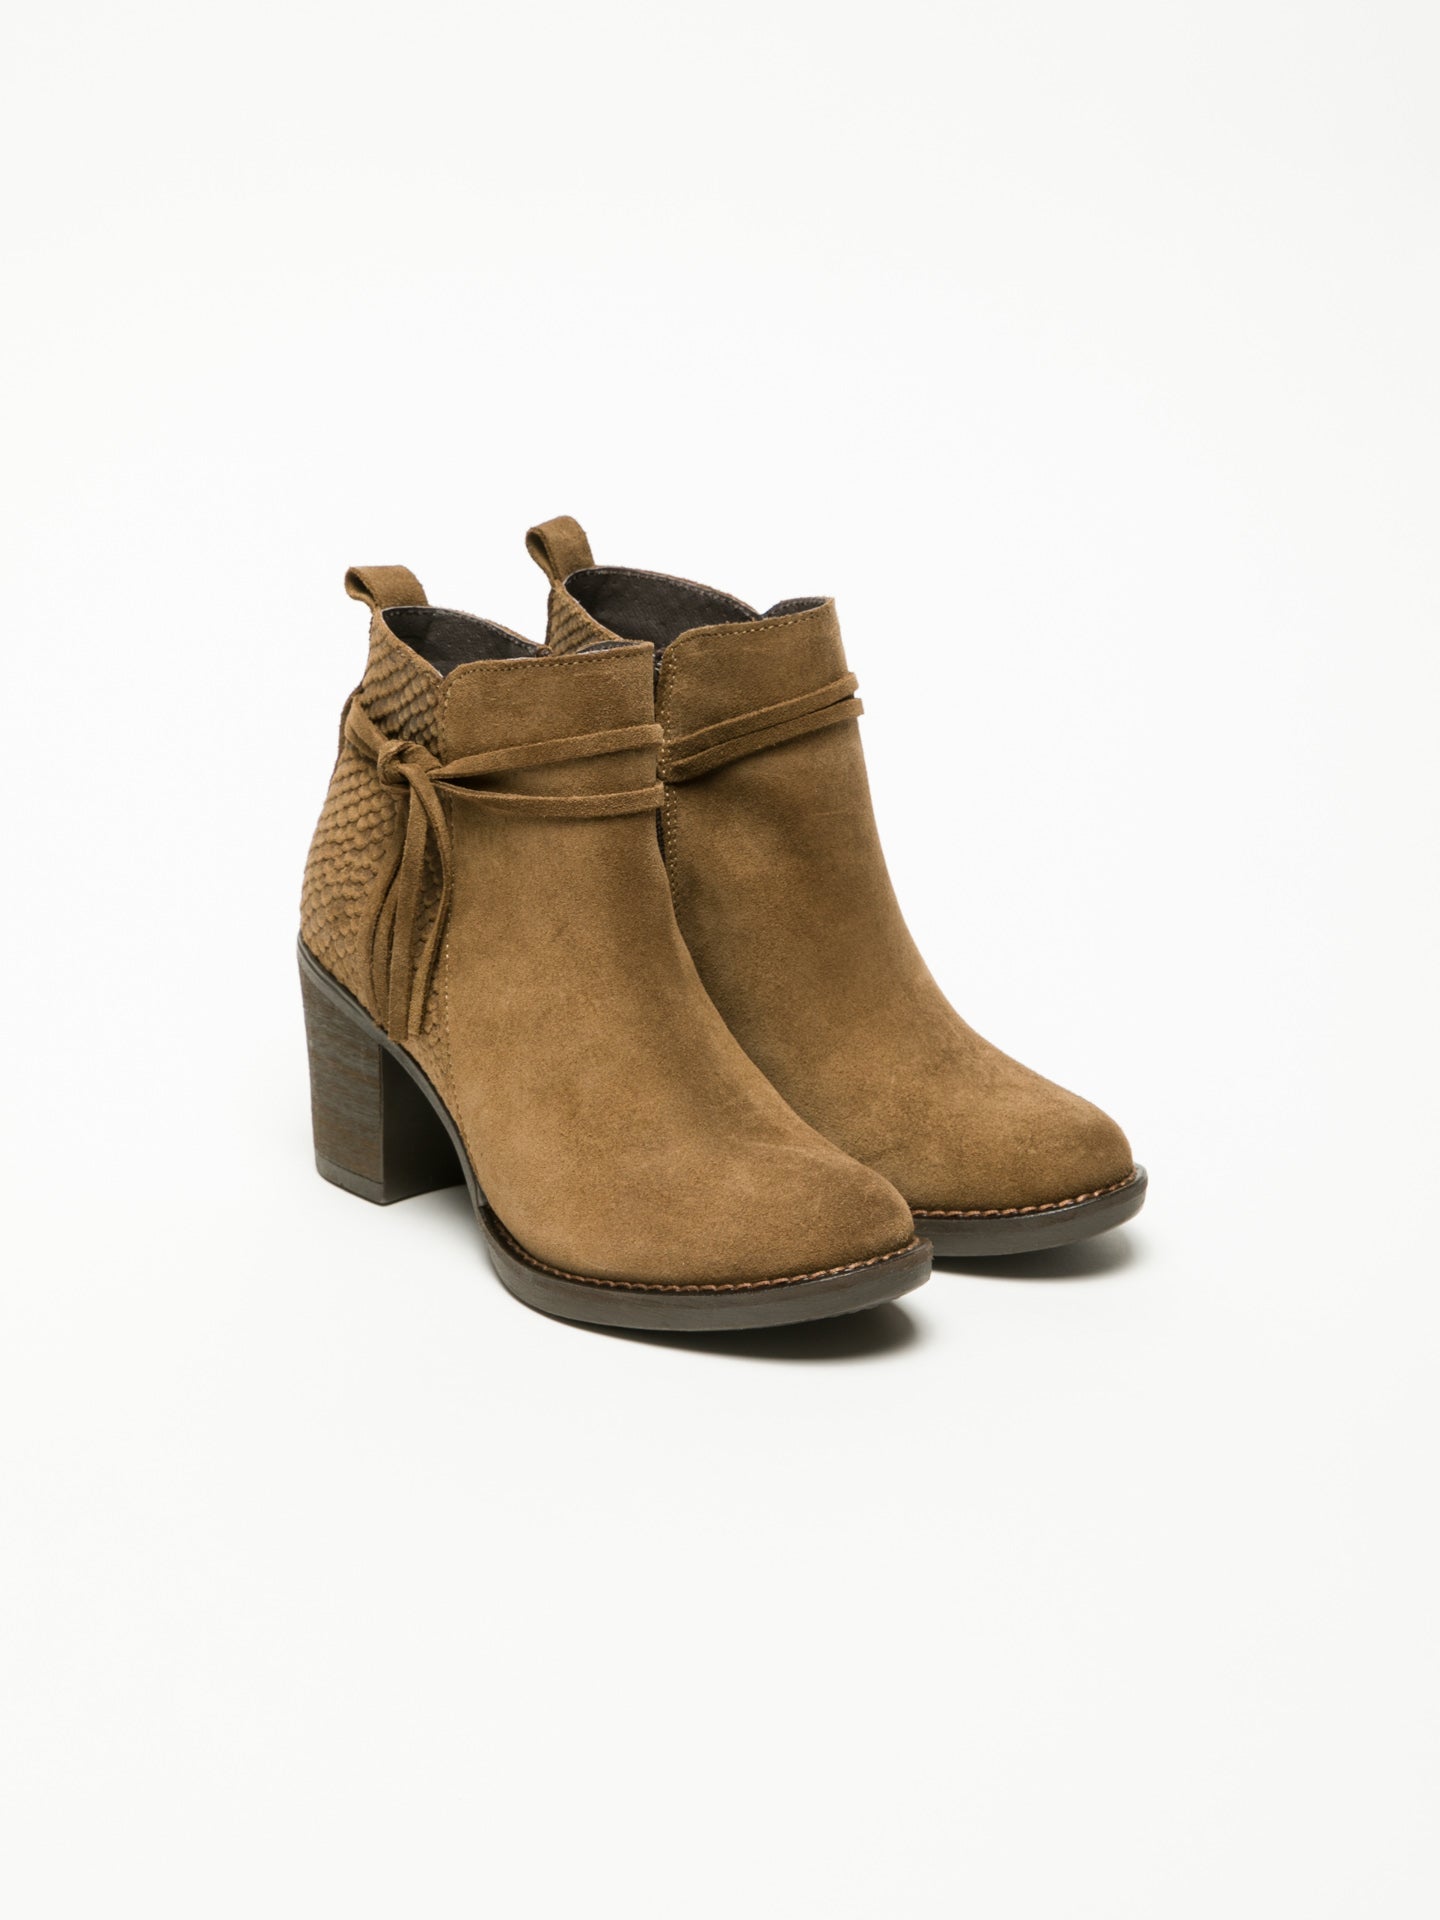 Foreva Tan Zip Up Ankle Boots